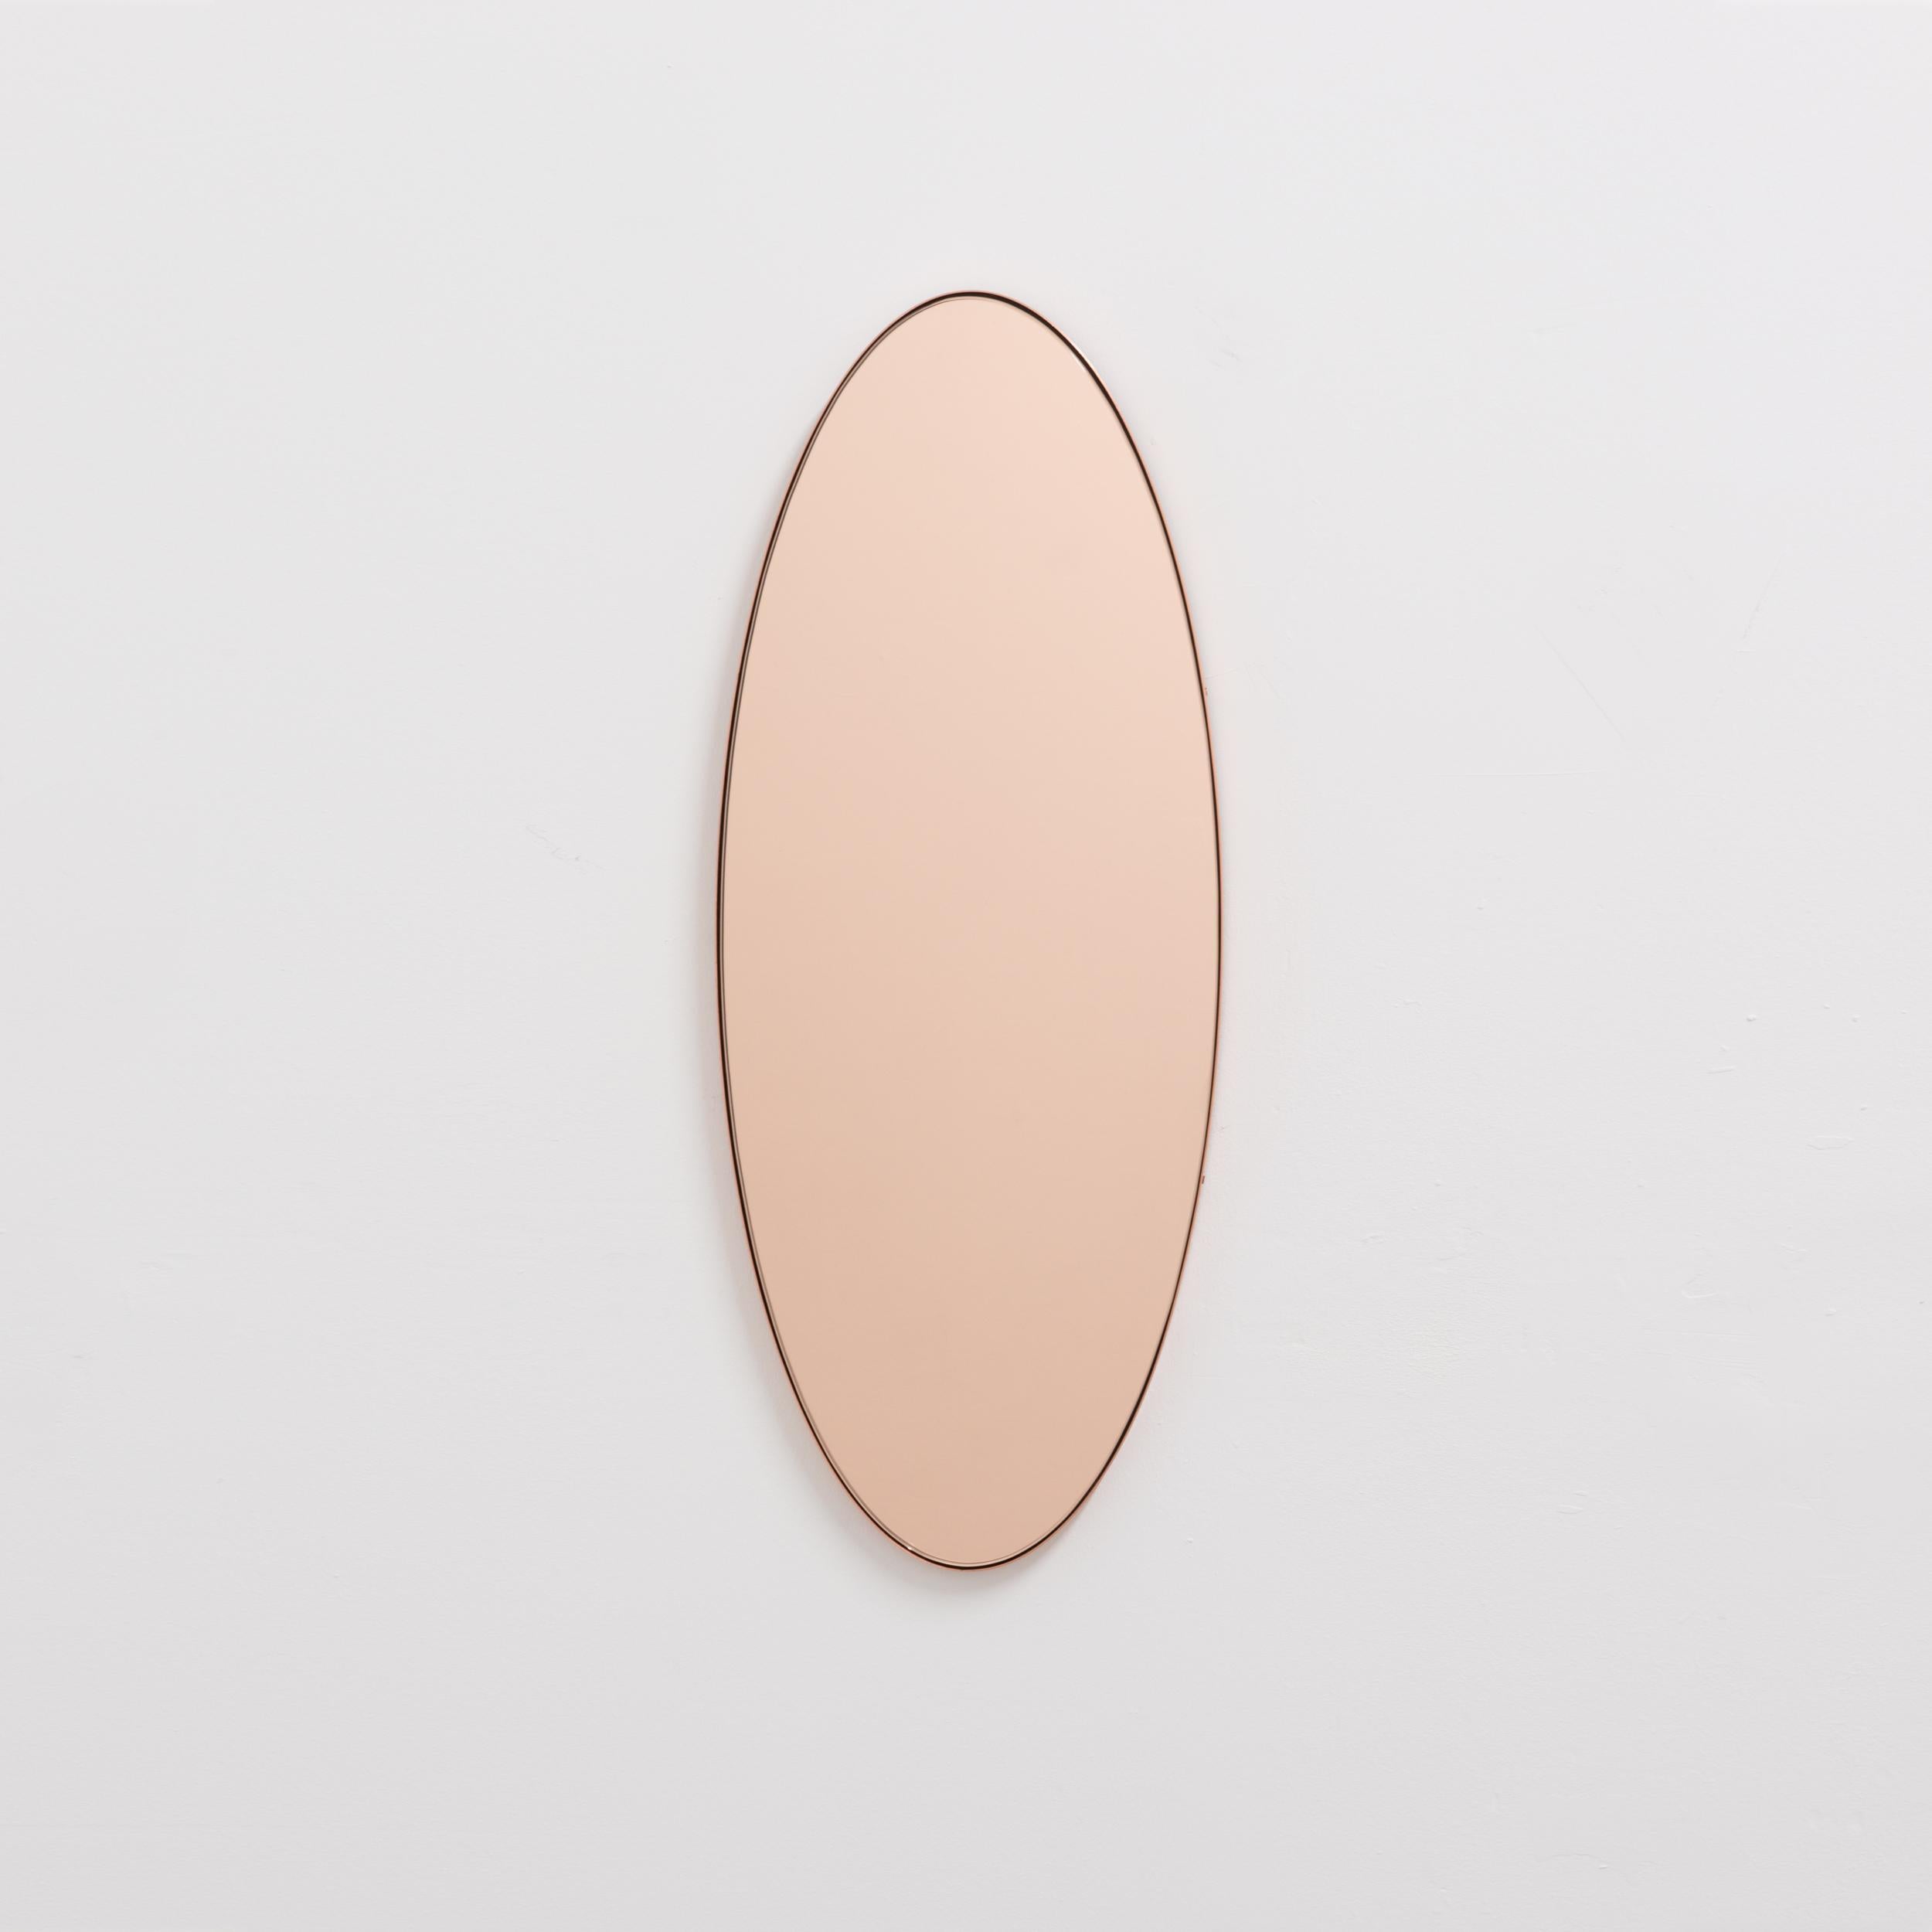 Contemporary oval shaped rose gold/peach mirror with an elegant copper frame. Designed and handcrafted in London, UK.

Our mirrors are designed with an integrated French cleat (split batten) system that ensures the mirror is securely mounted flush